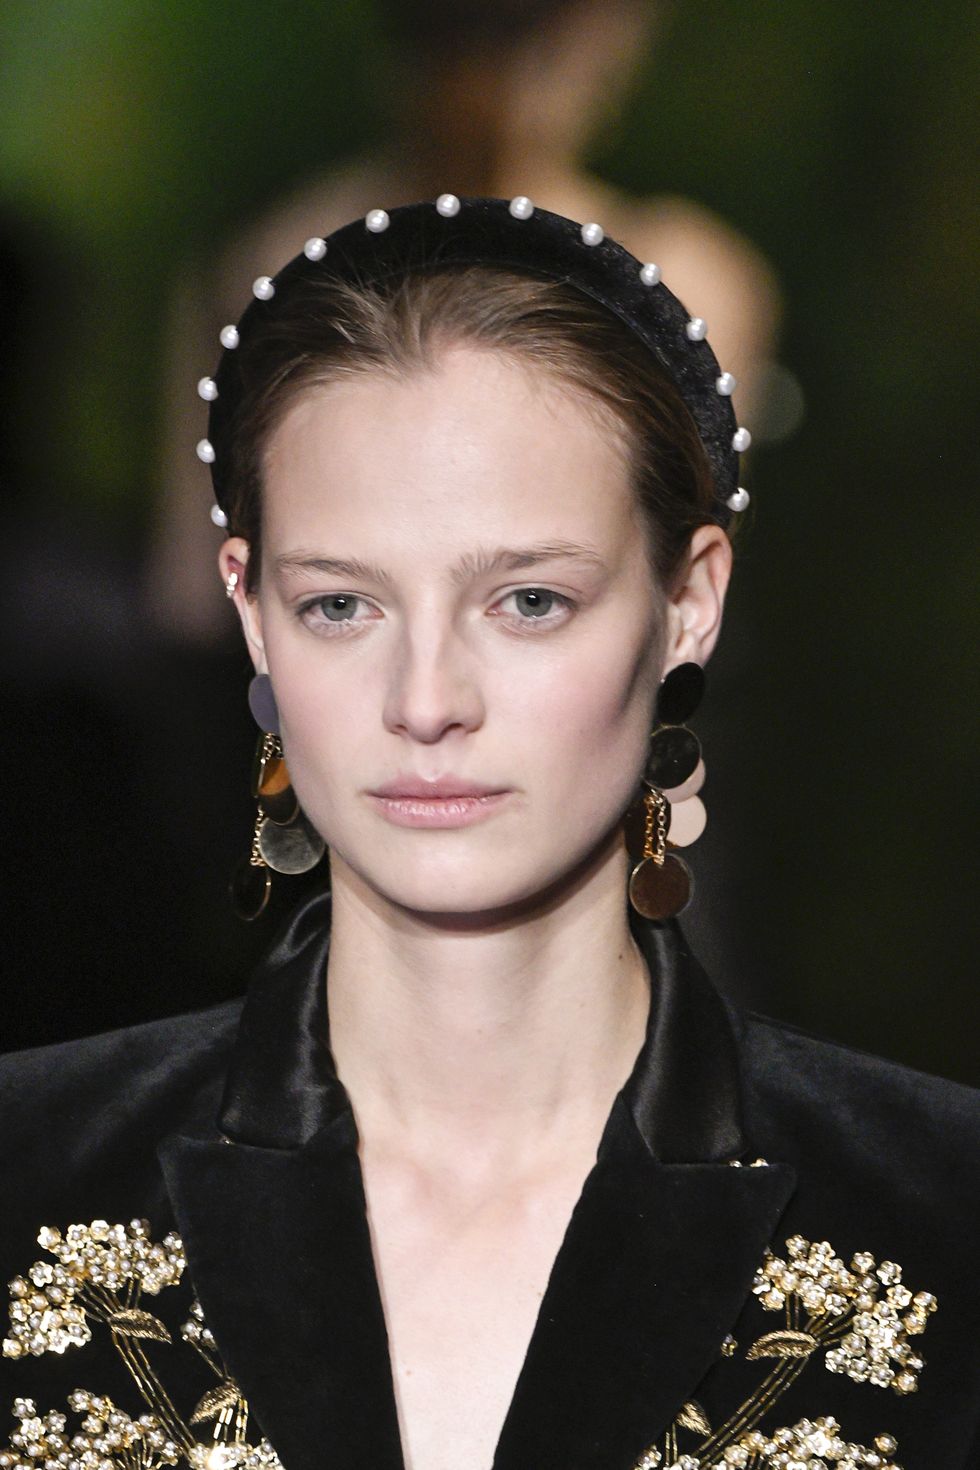 <p>With some top notes of Vermeer. A large contingent of commenters ran screaming from the '80s-ness of it all, but we think with the right, smart outfit, and those earrings, a pearl headband could be really elegant. &nbsp;&nbsp;</p>